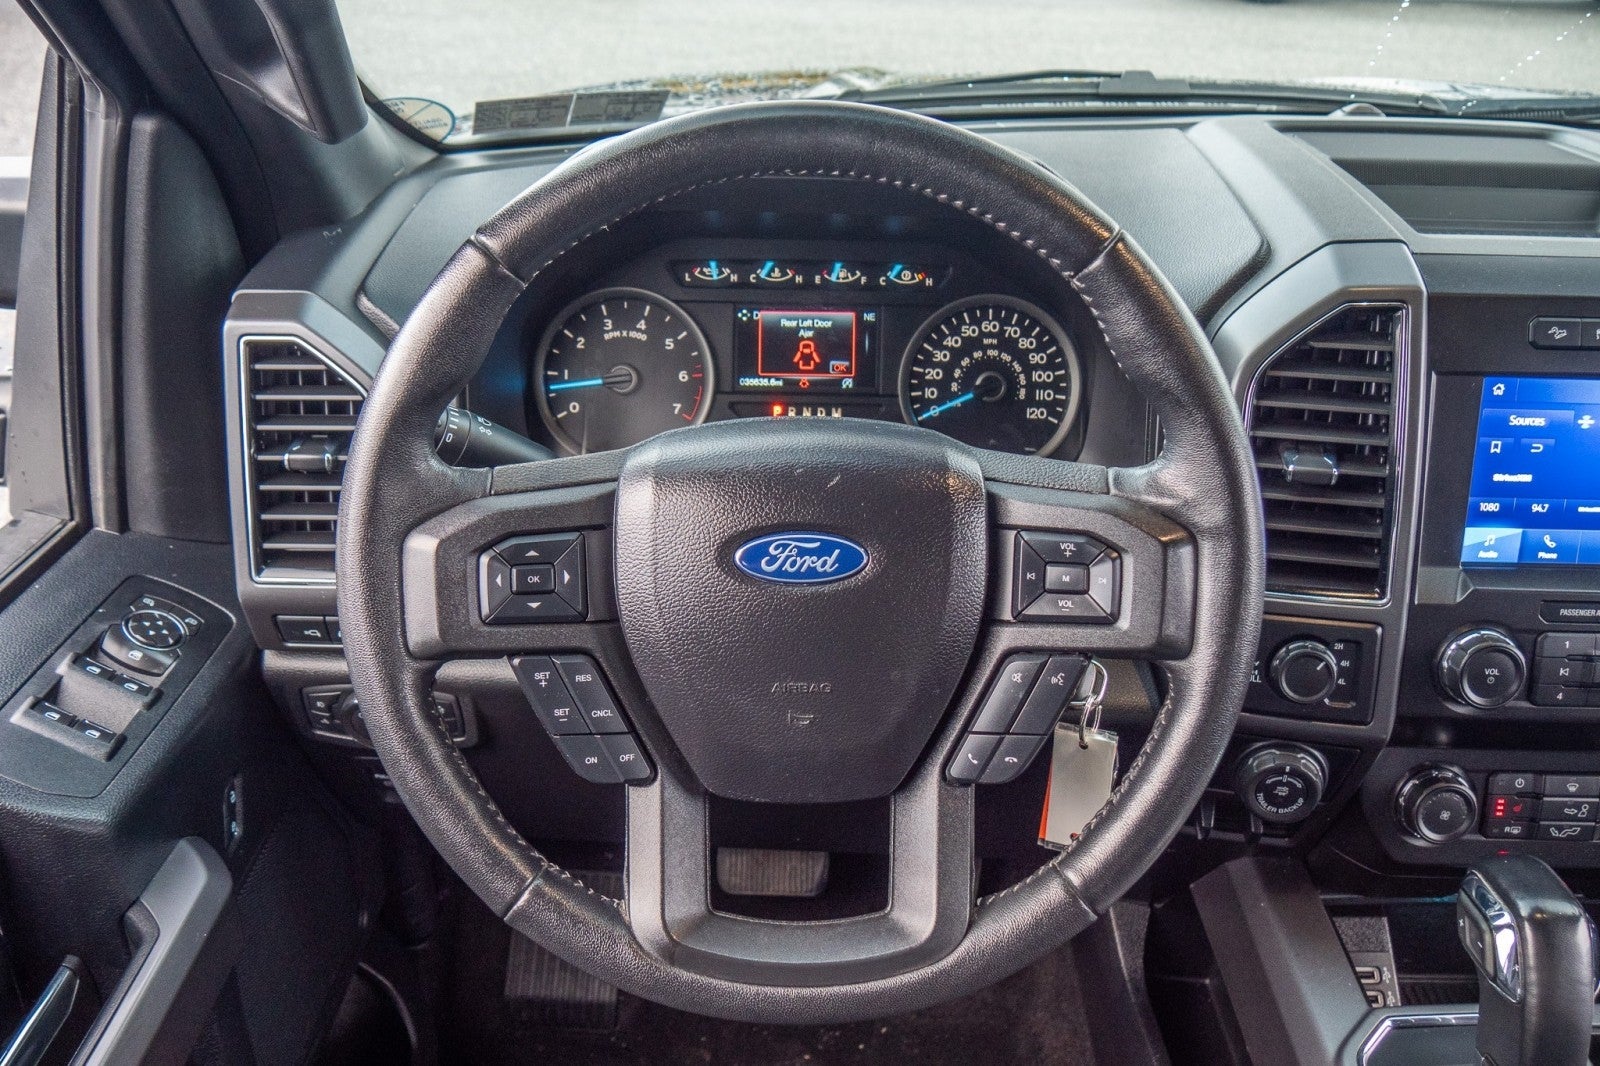 2020 Ford F-150 Supercrew 6.5 Bed XLT